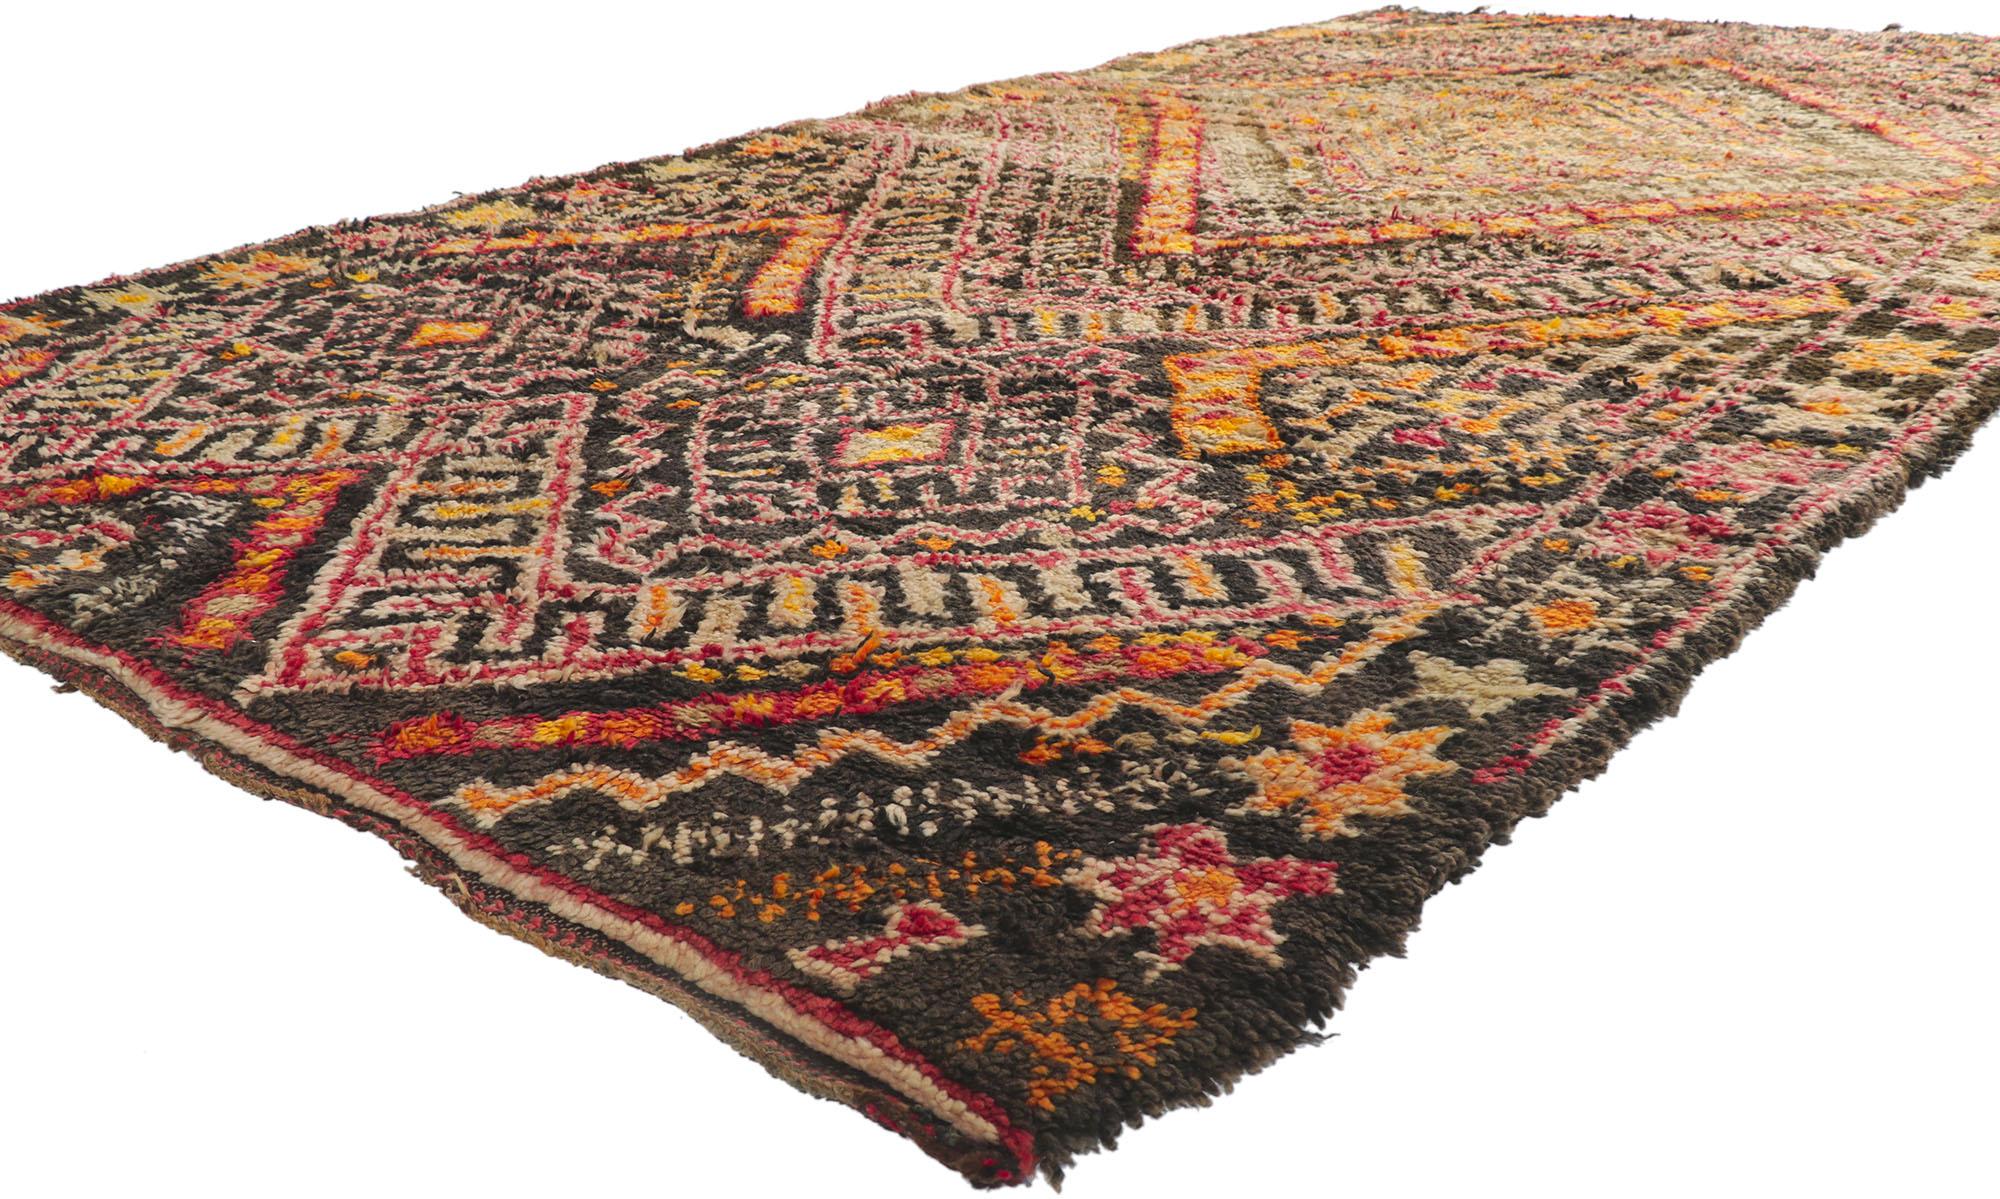 21338 vintage Berber Moroccan Beni M'Guild rug with Tribal style 06'09 x 13'06. Showcasing a bold expressive design, incredible detail and texture, this hand knotted wool vintage Berber Beni M'Guild Moroccan rug is a captivating vision of woven